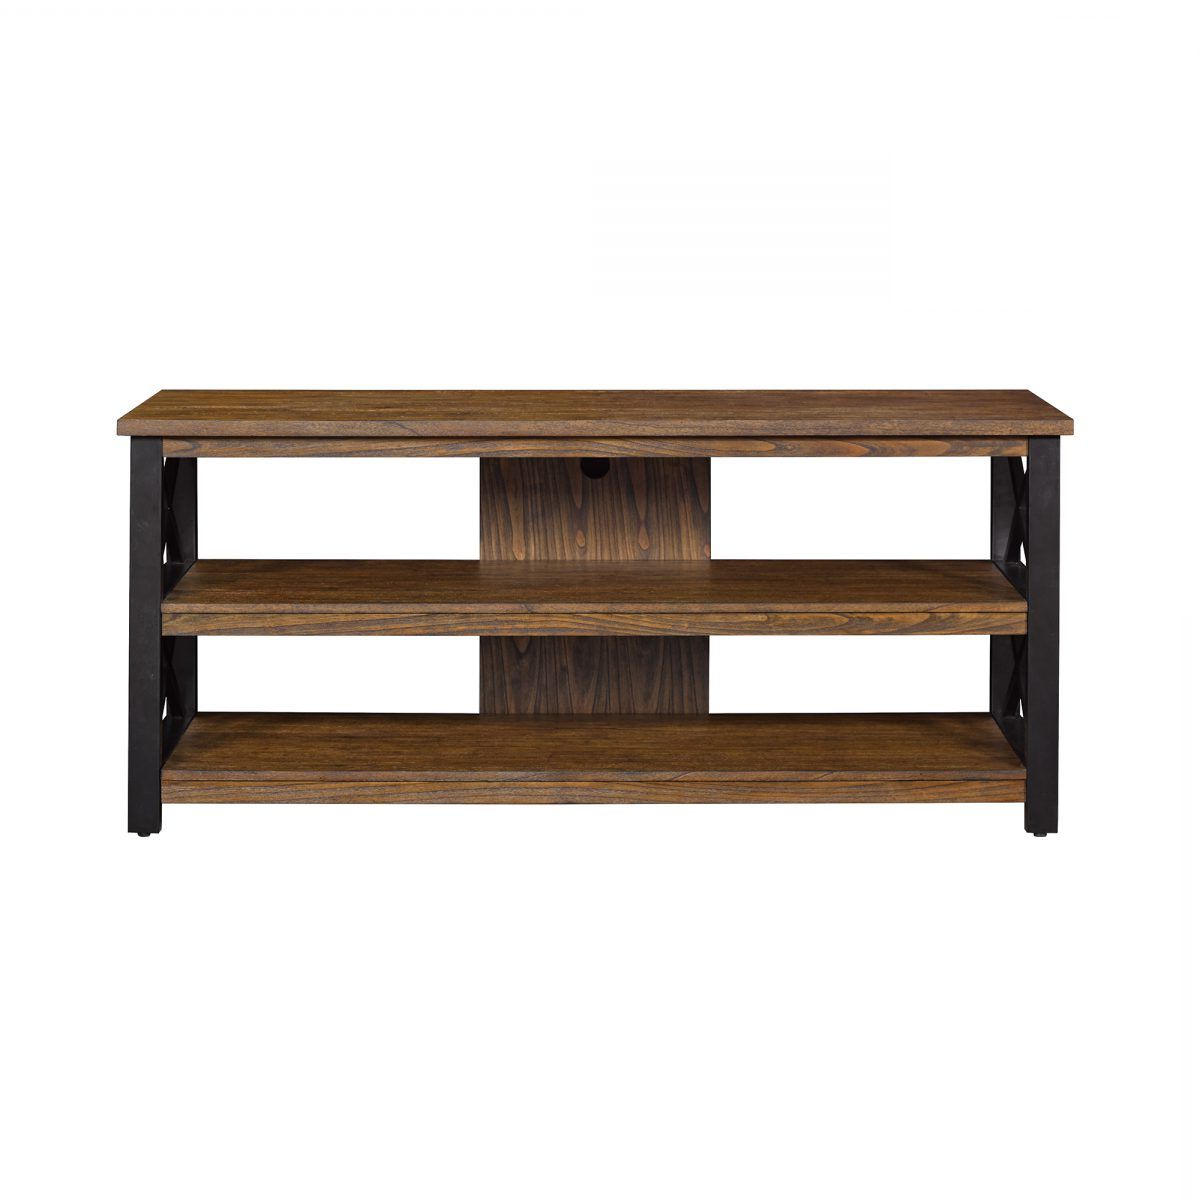 Bjs Bell'o Open Concept Tv Stand $100 Shipped (Photo 1 of 20)